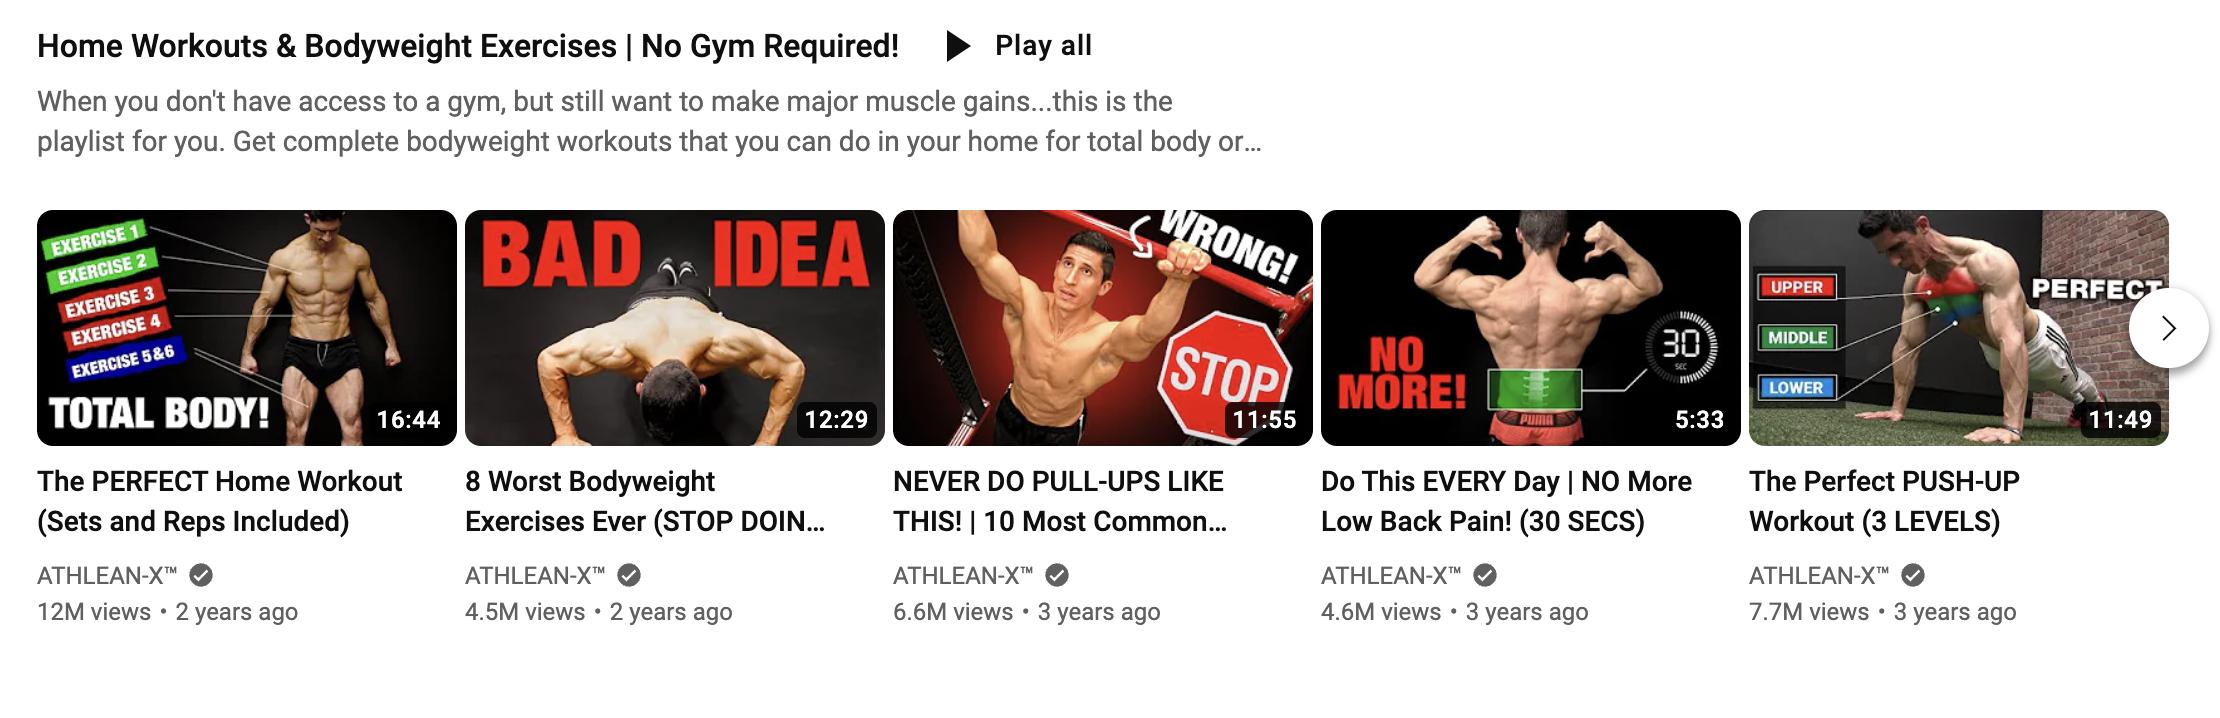 Athlean X YouTube thumbnails with keyword-driven titles